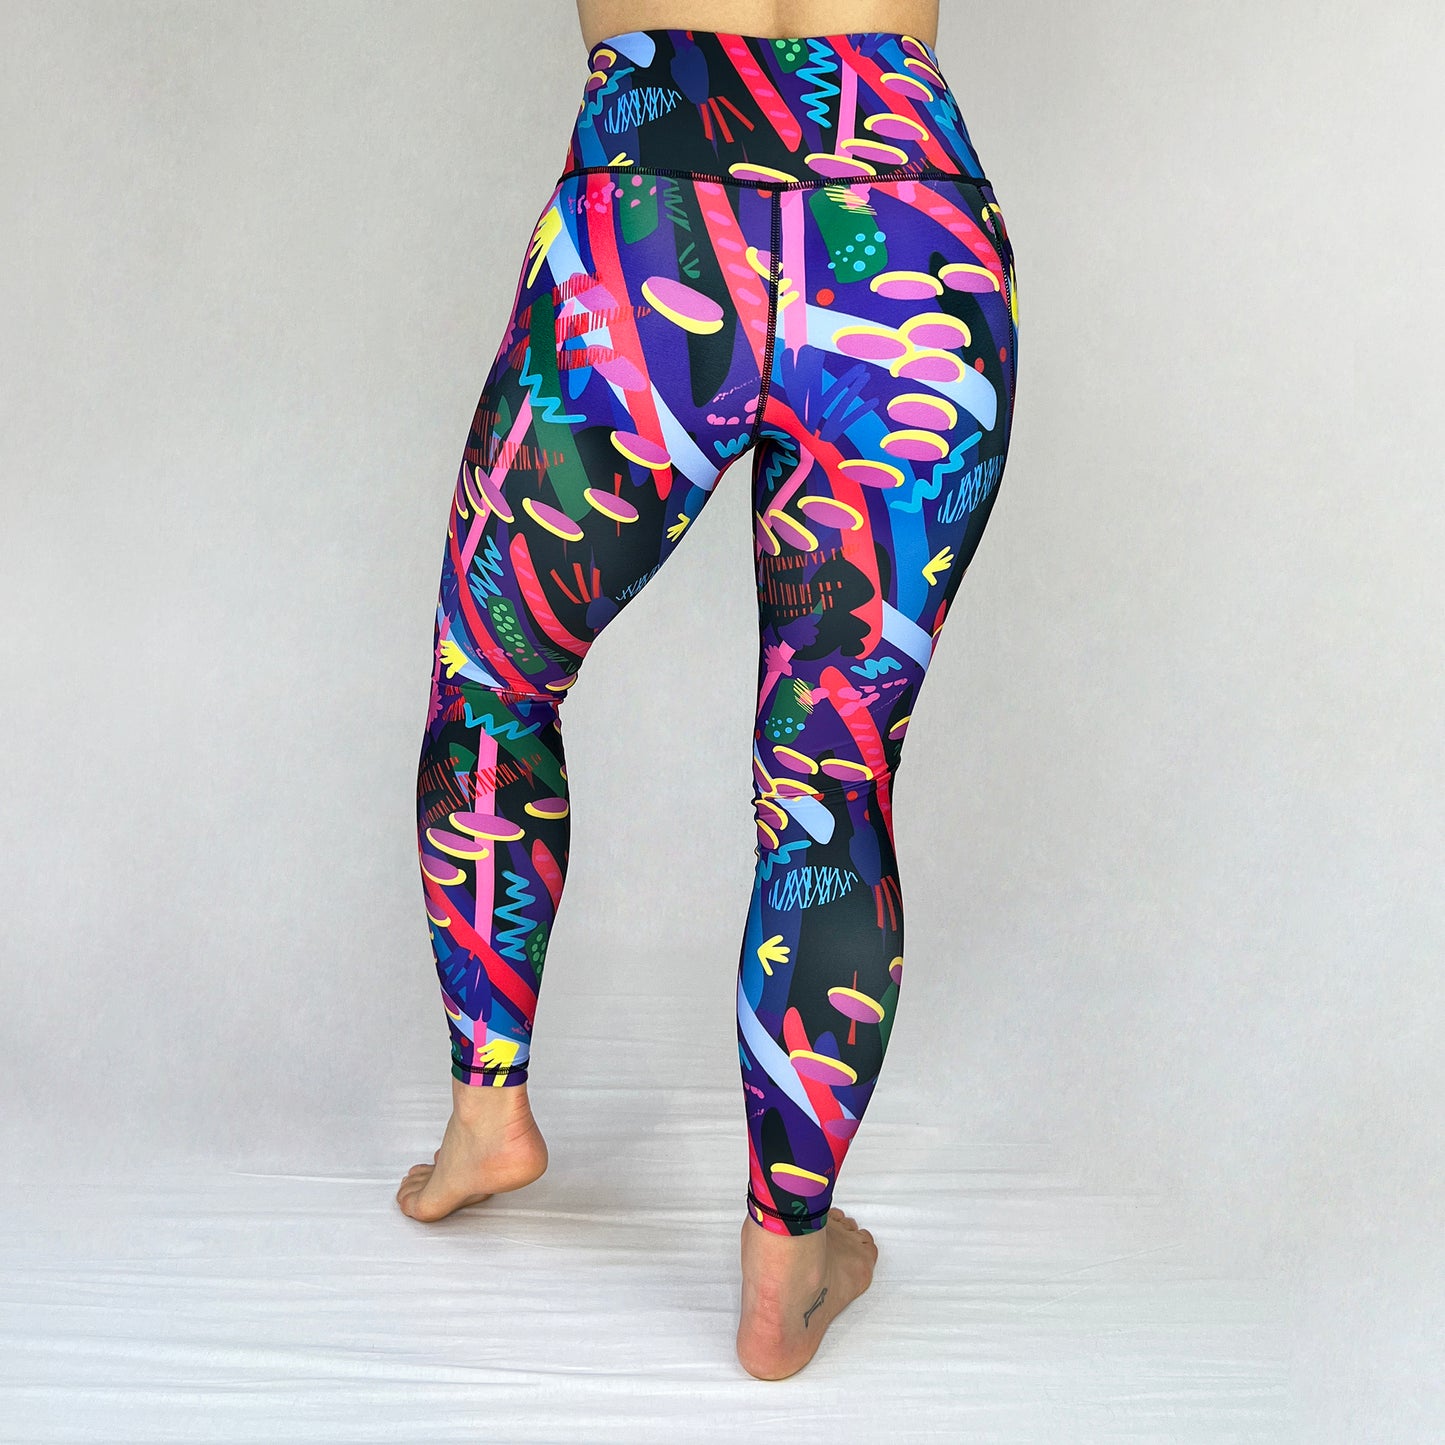 Olympia 2022 Ltd full length leggings with pocket by Art2Go Monique Baques back